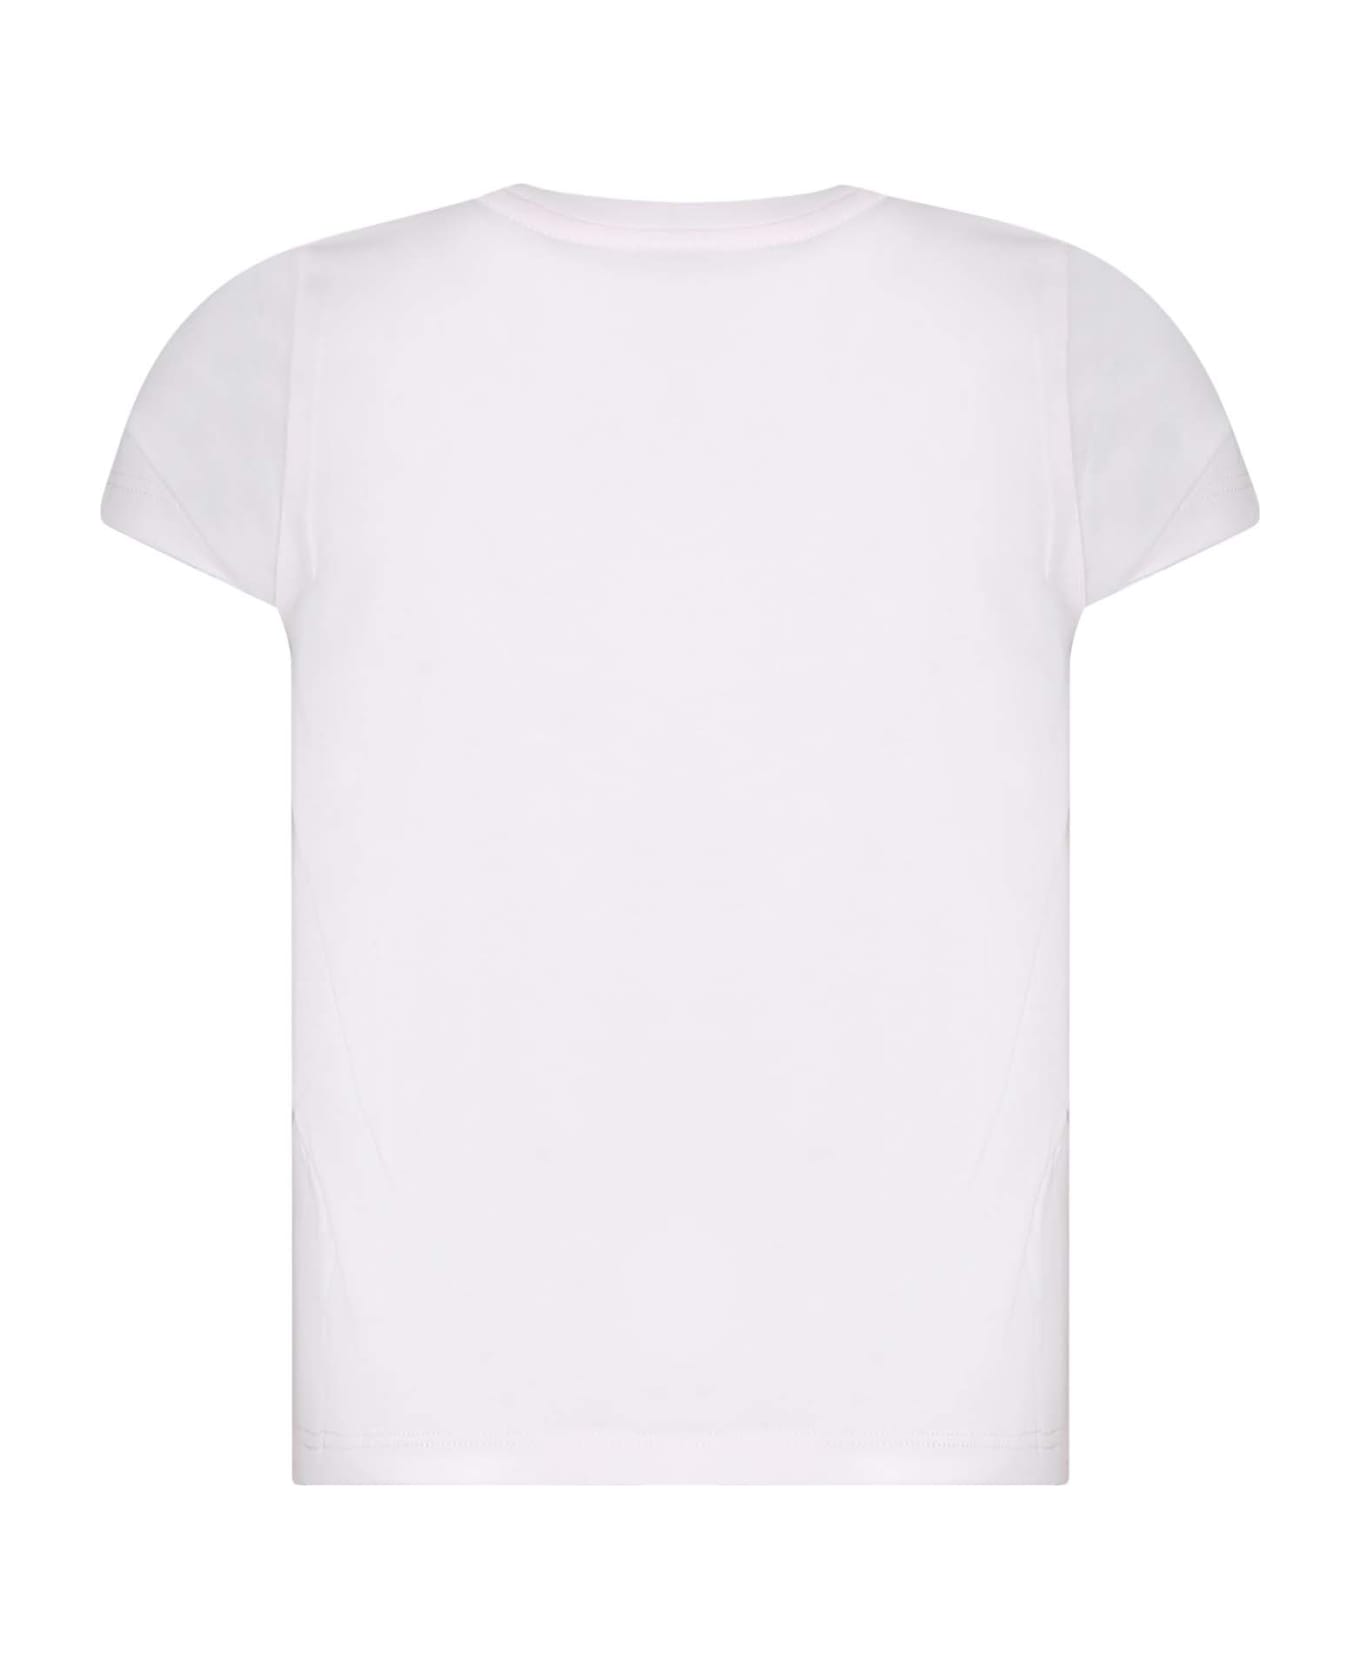 Lanvin Pink T-shirt For Girl With Logo - Rosa